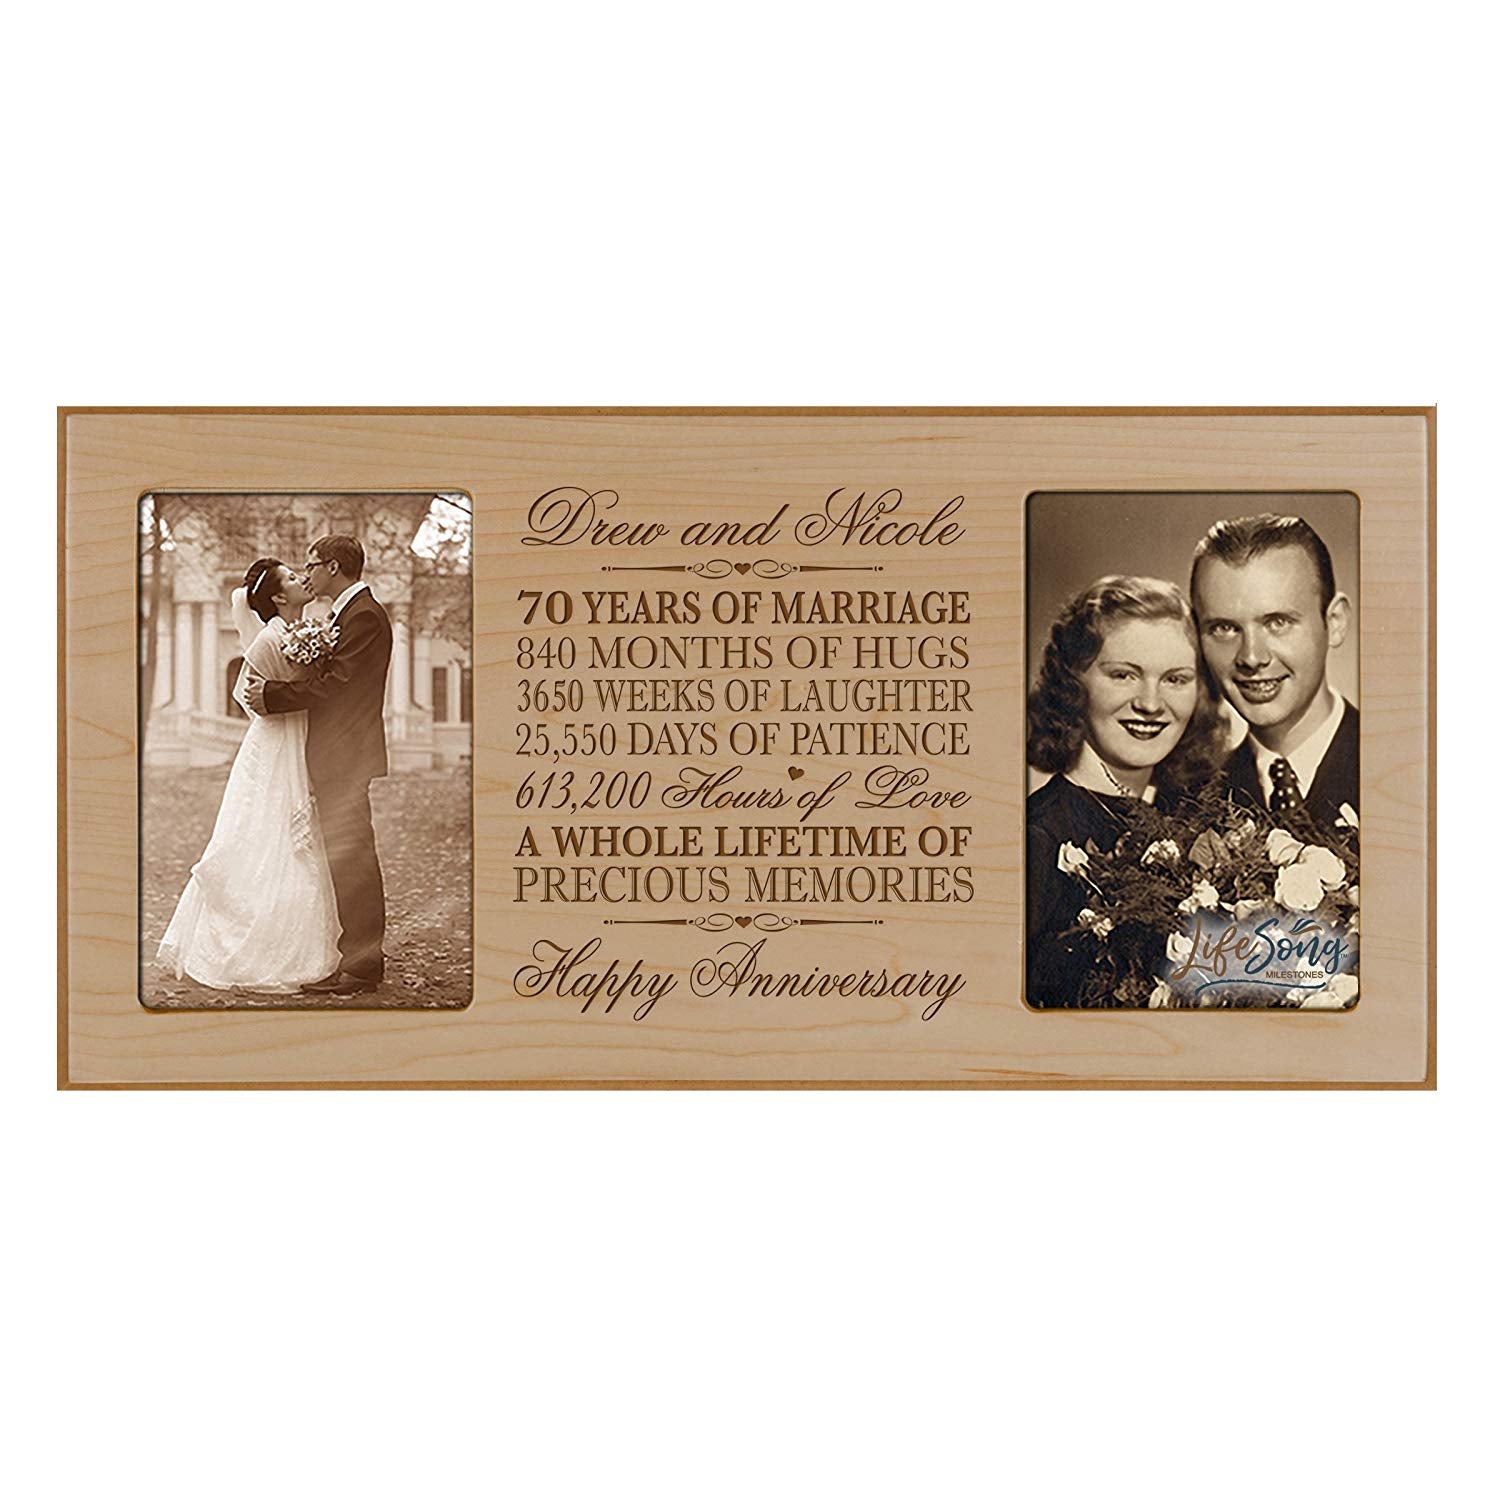 Personalized 70th Anniversary Double Photo Frame - Happy Anniversary - LifeSong Milestones